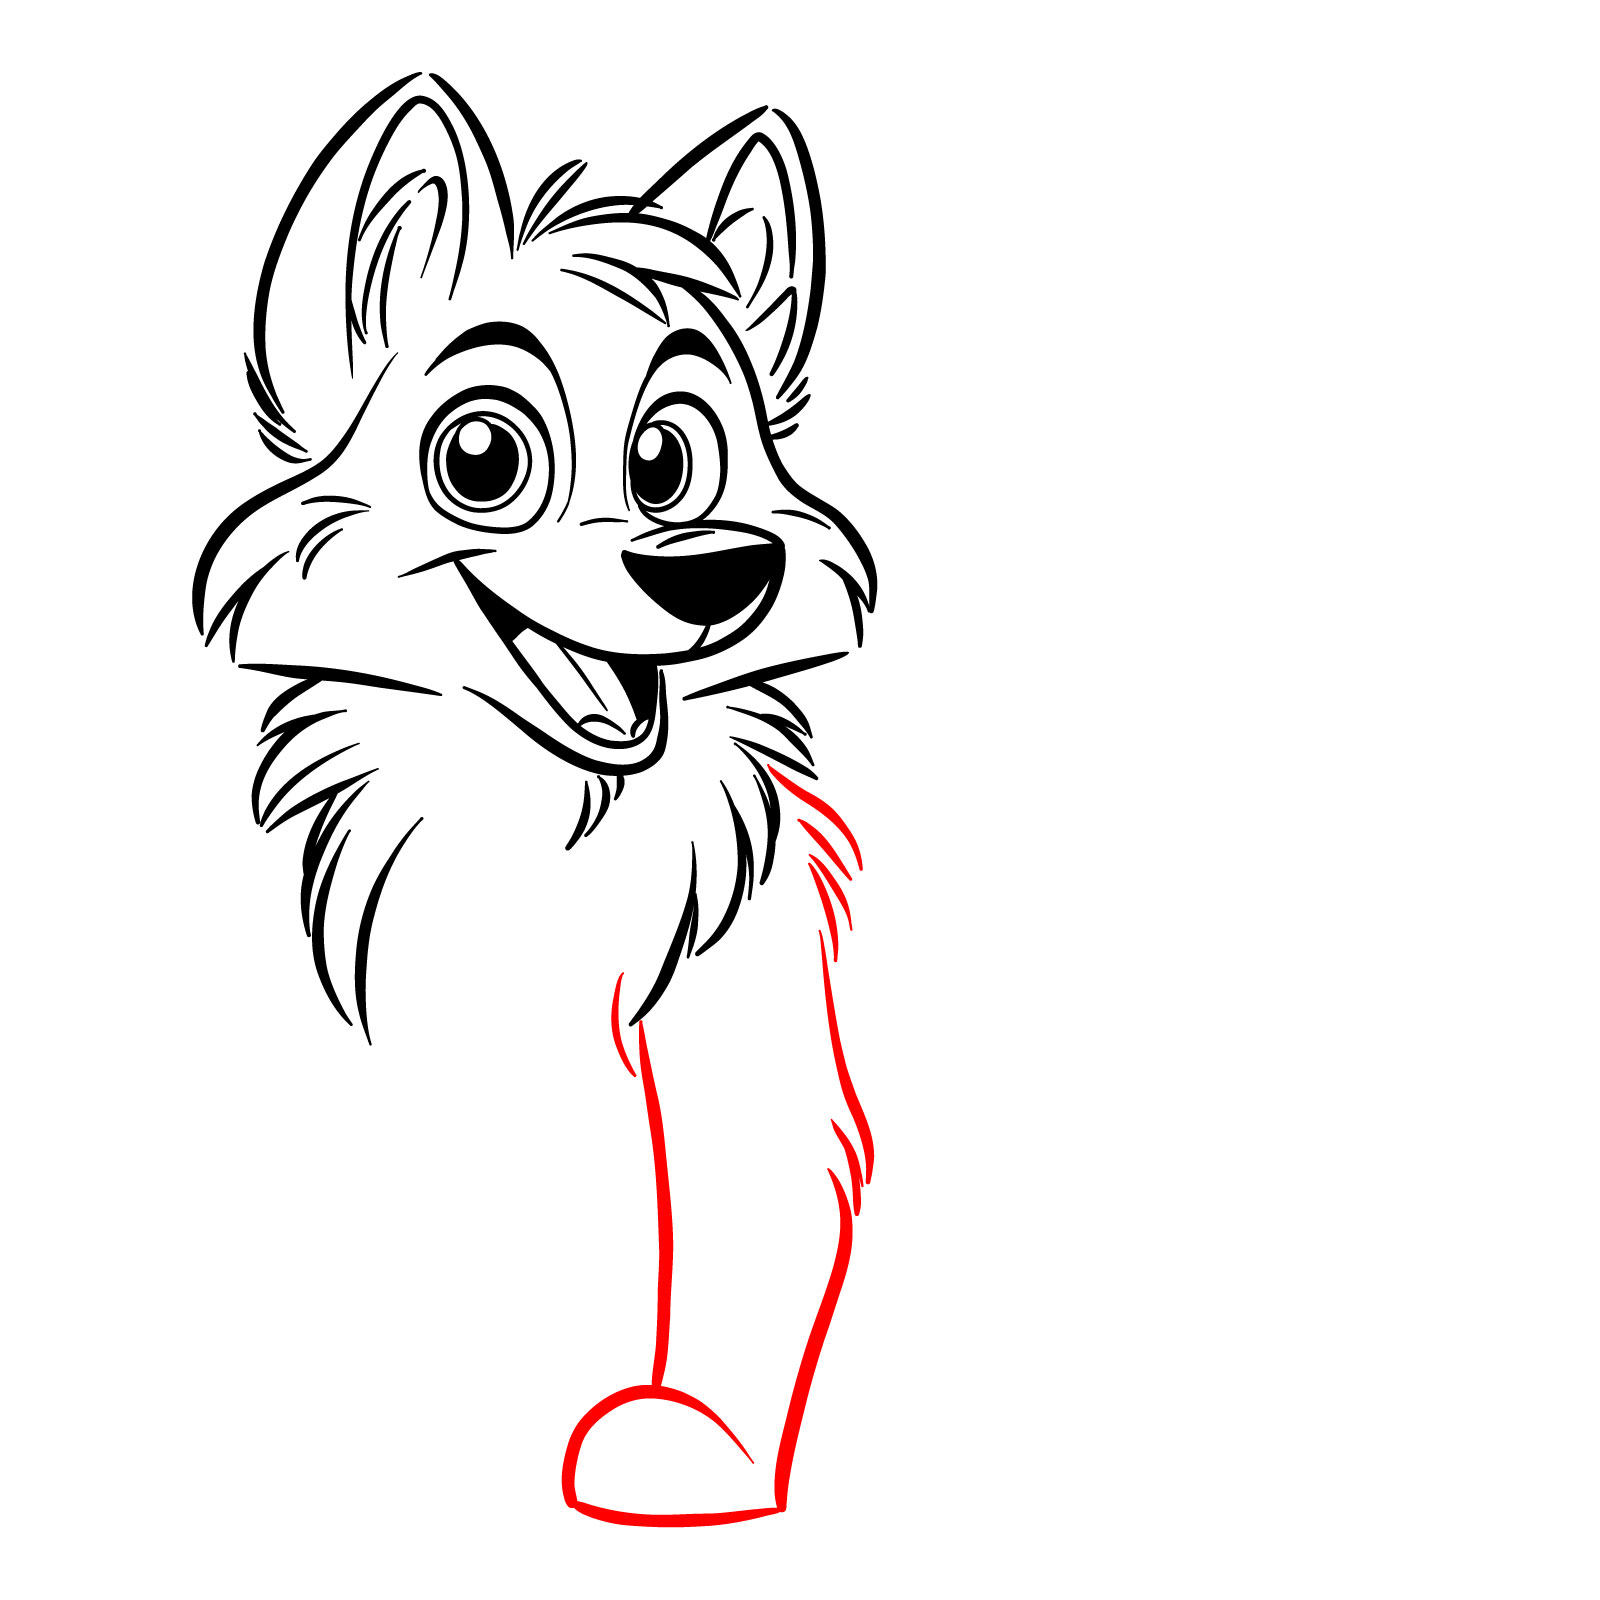 First front leg added to the cartoon wolf sketch - step 11